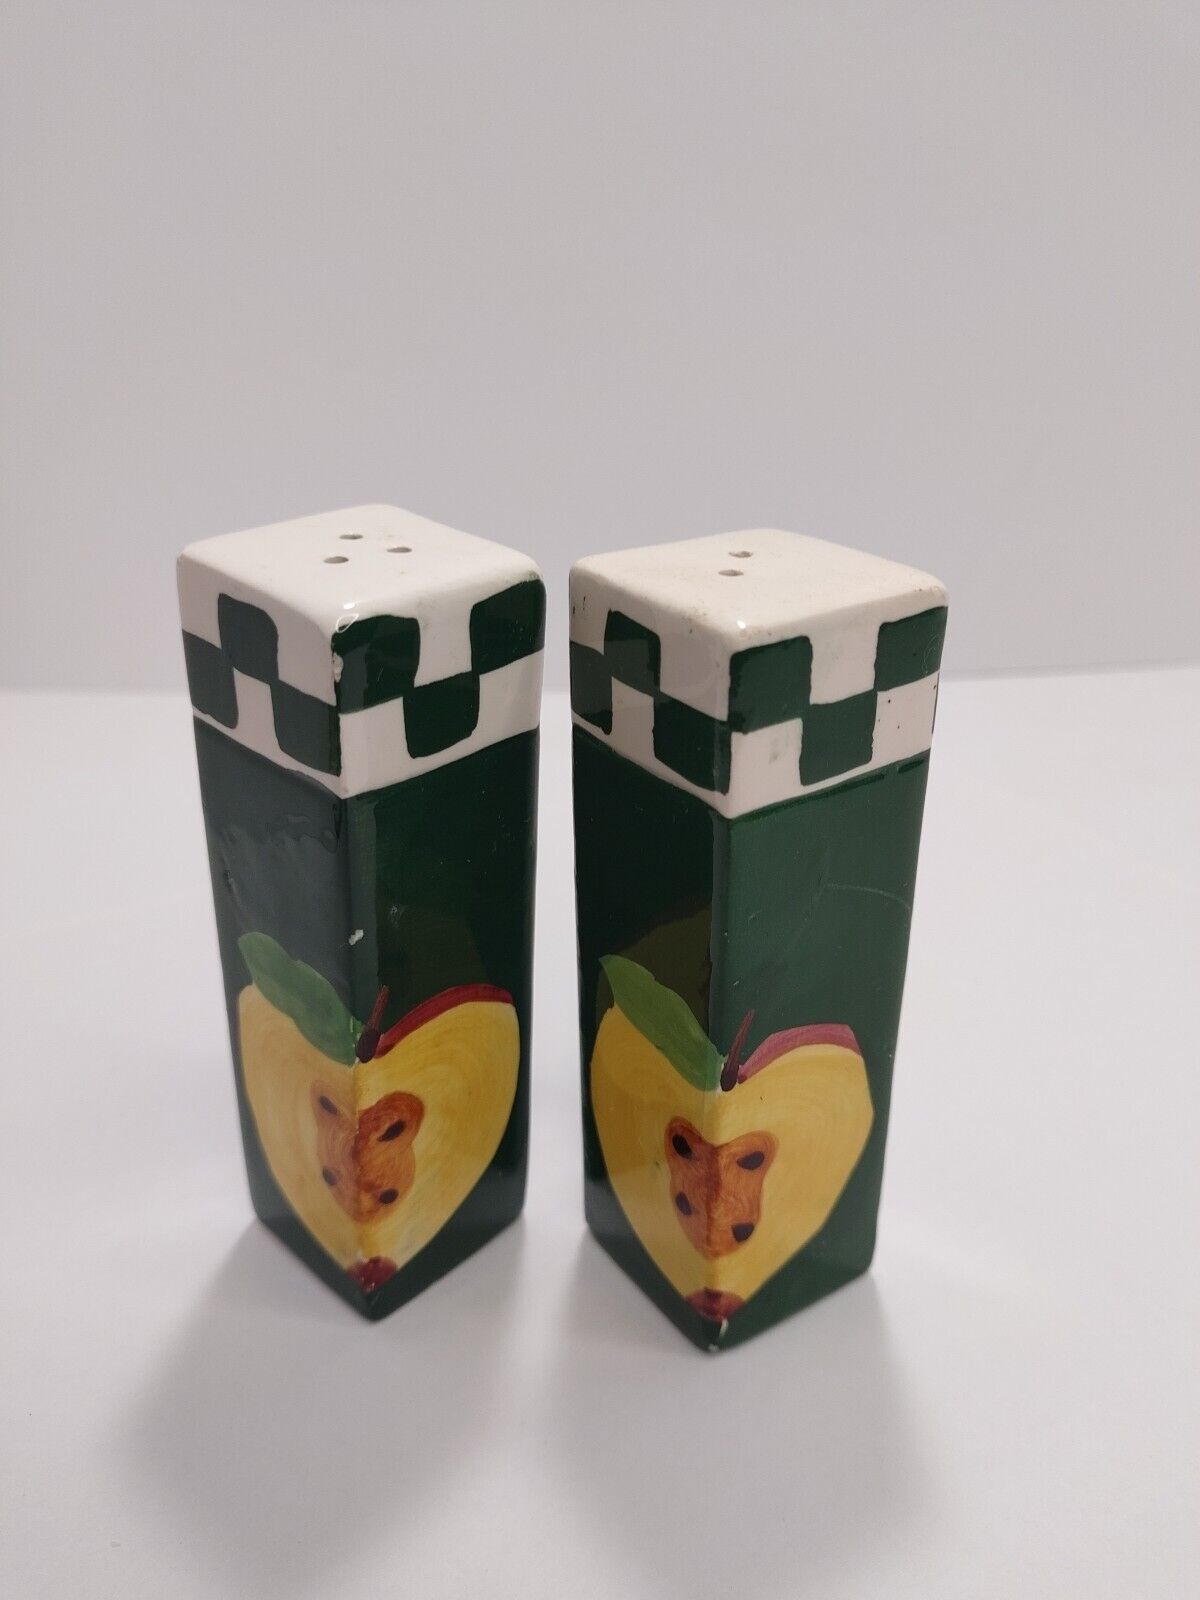 Vintage Green Country Apple Salt & Pepper Shakers Ceramic Square Tall